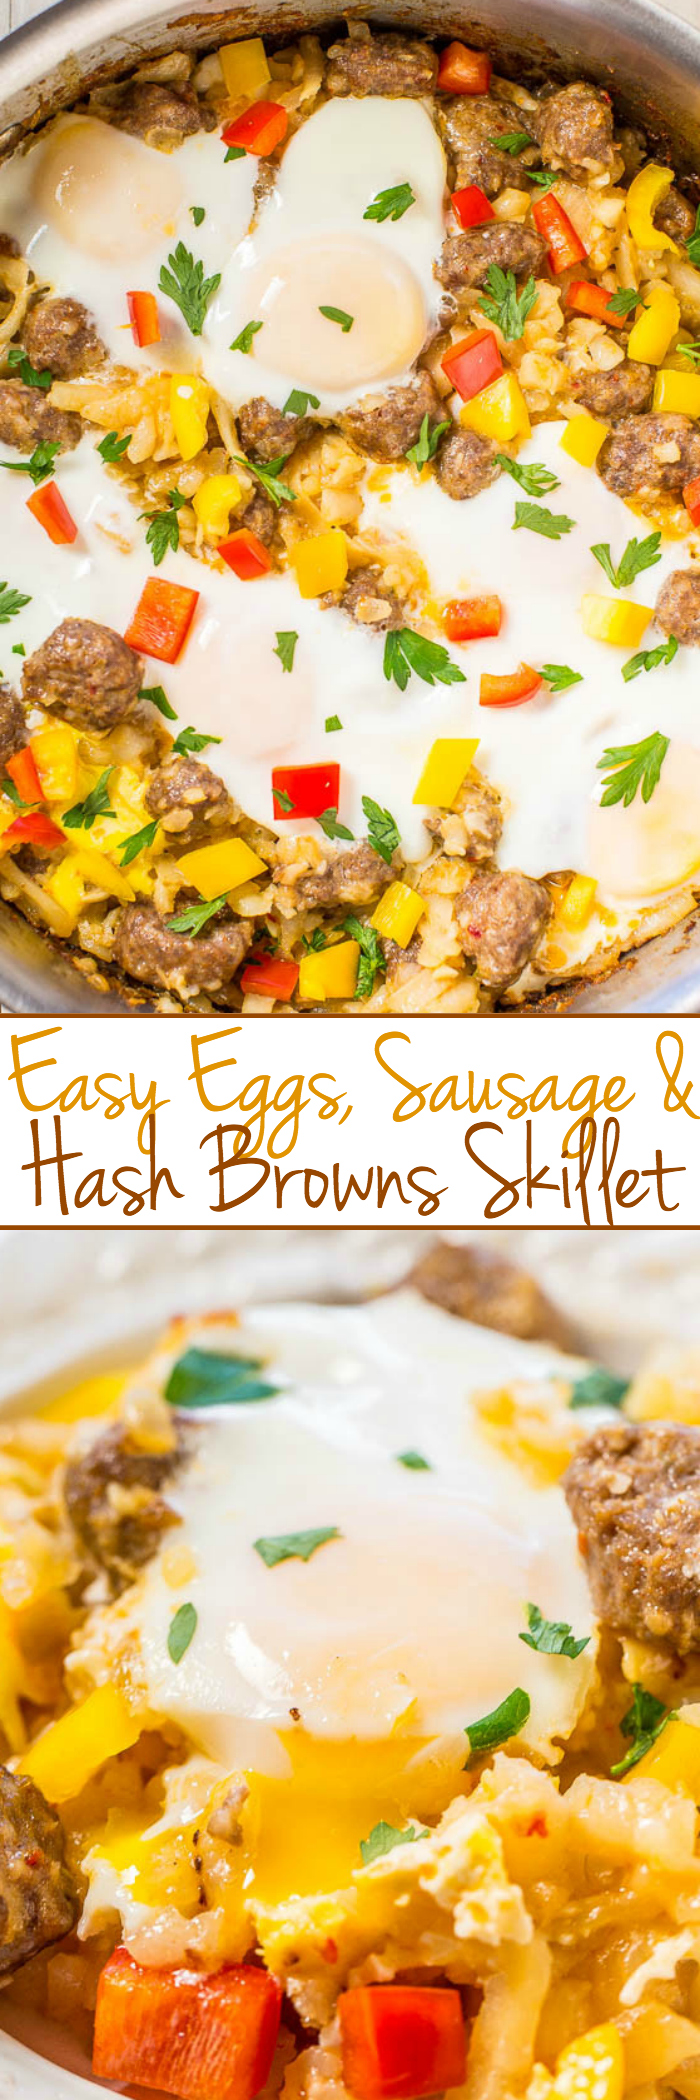 Easy Eggs, Sausage, and Hash Browns Skillet - Hearty comfort food that's worth getting out of bed for!! Great for brunch or as breakfast-for-dinner! Ready in 30 minutes and packed with big flavors!!